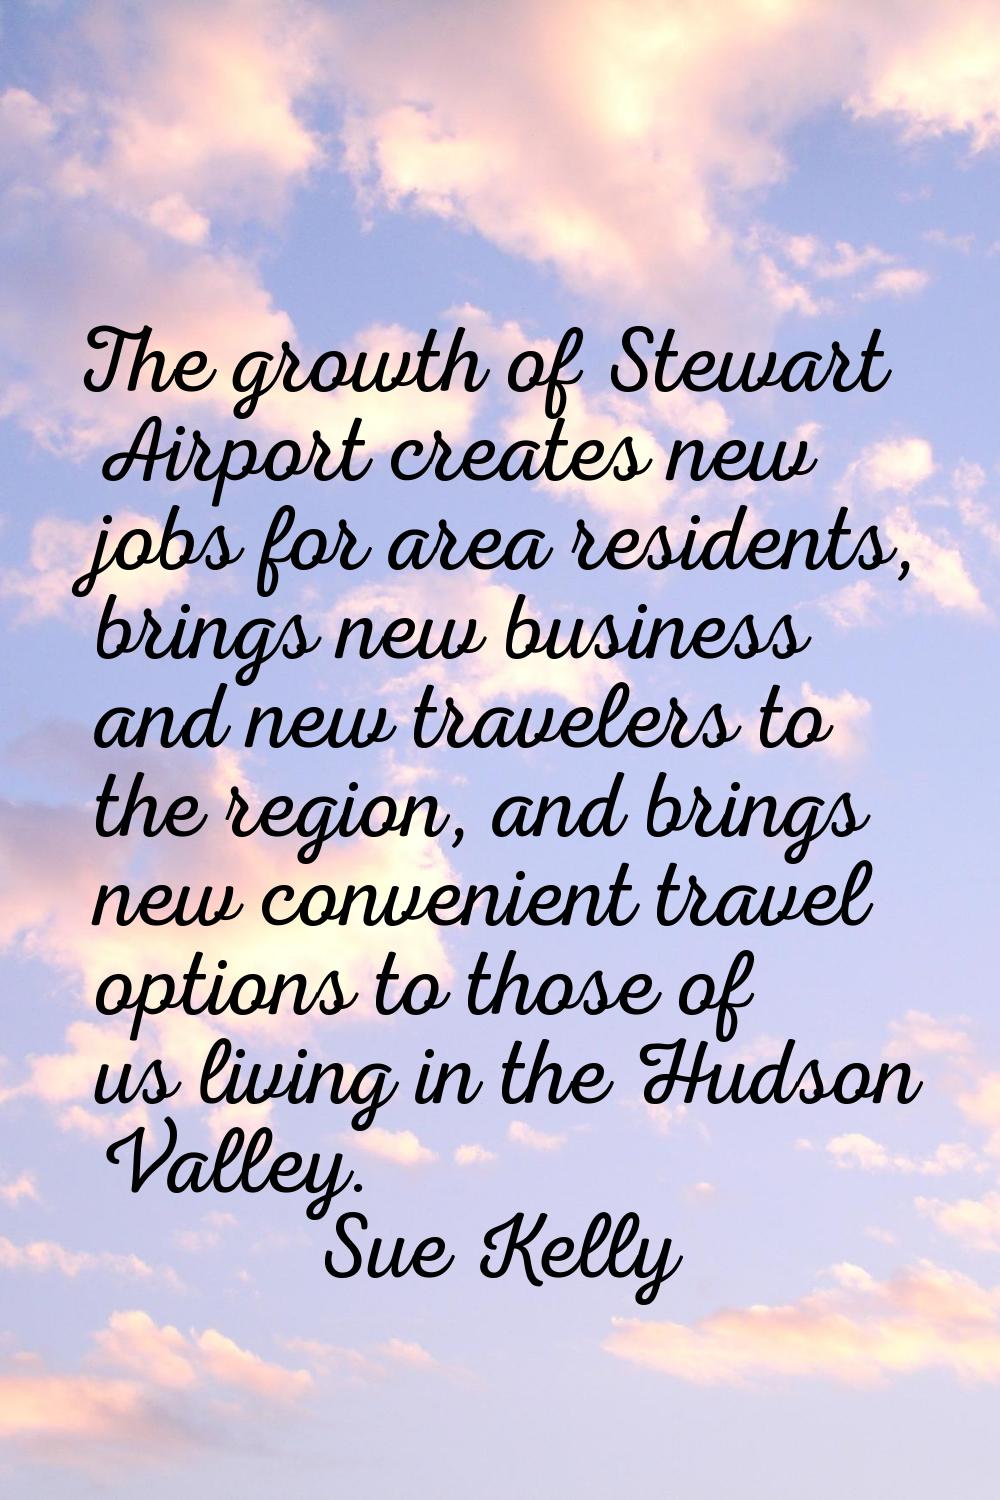 The growth of Stewart Airport creates new jobs for area residents, brings new business and new trav